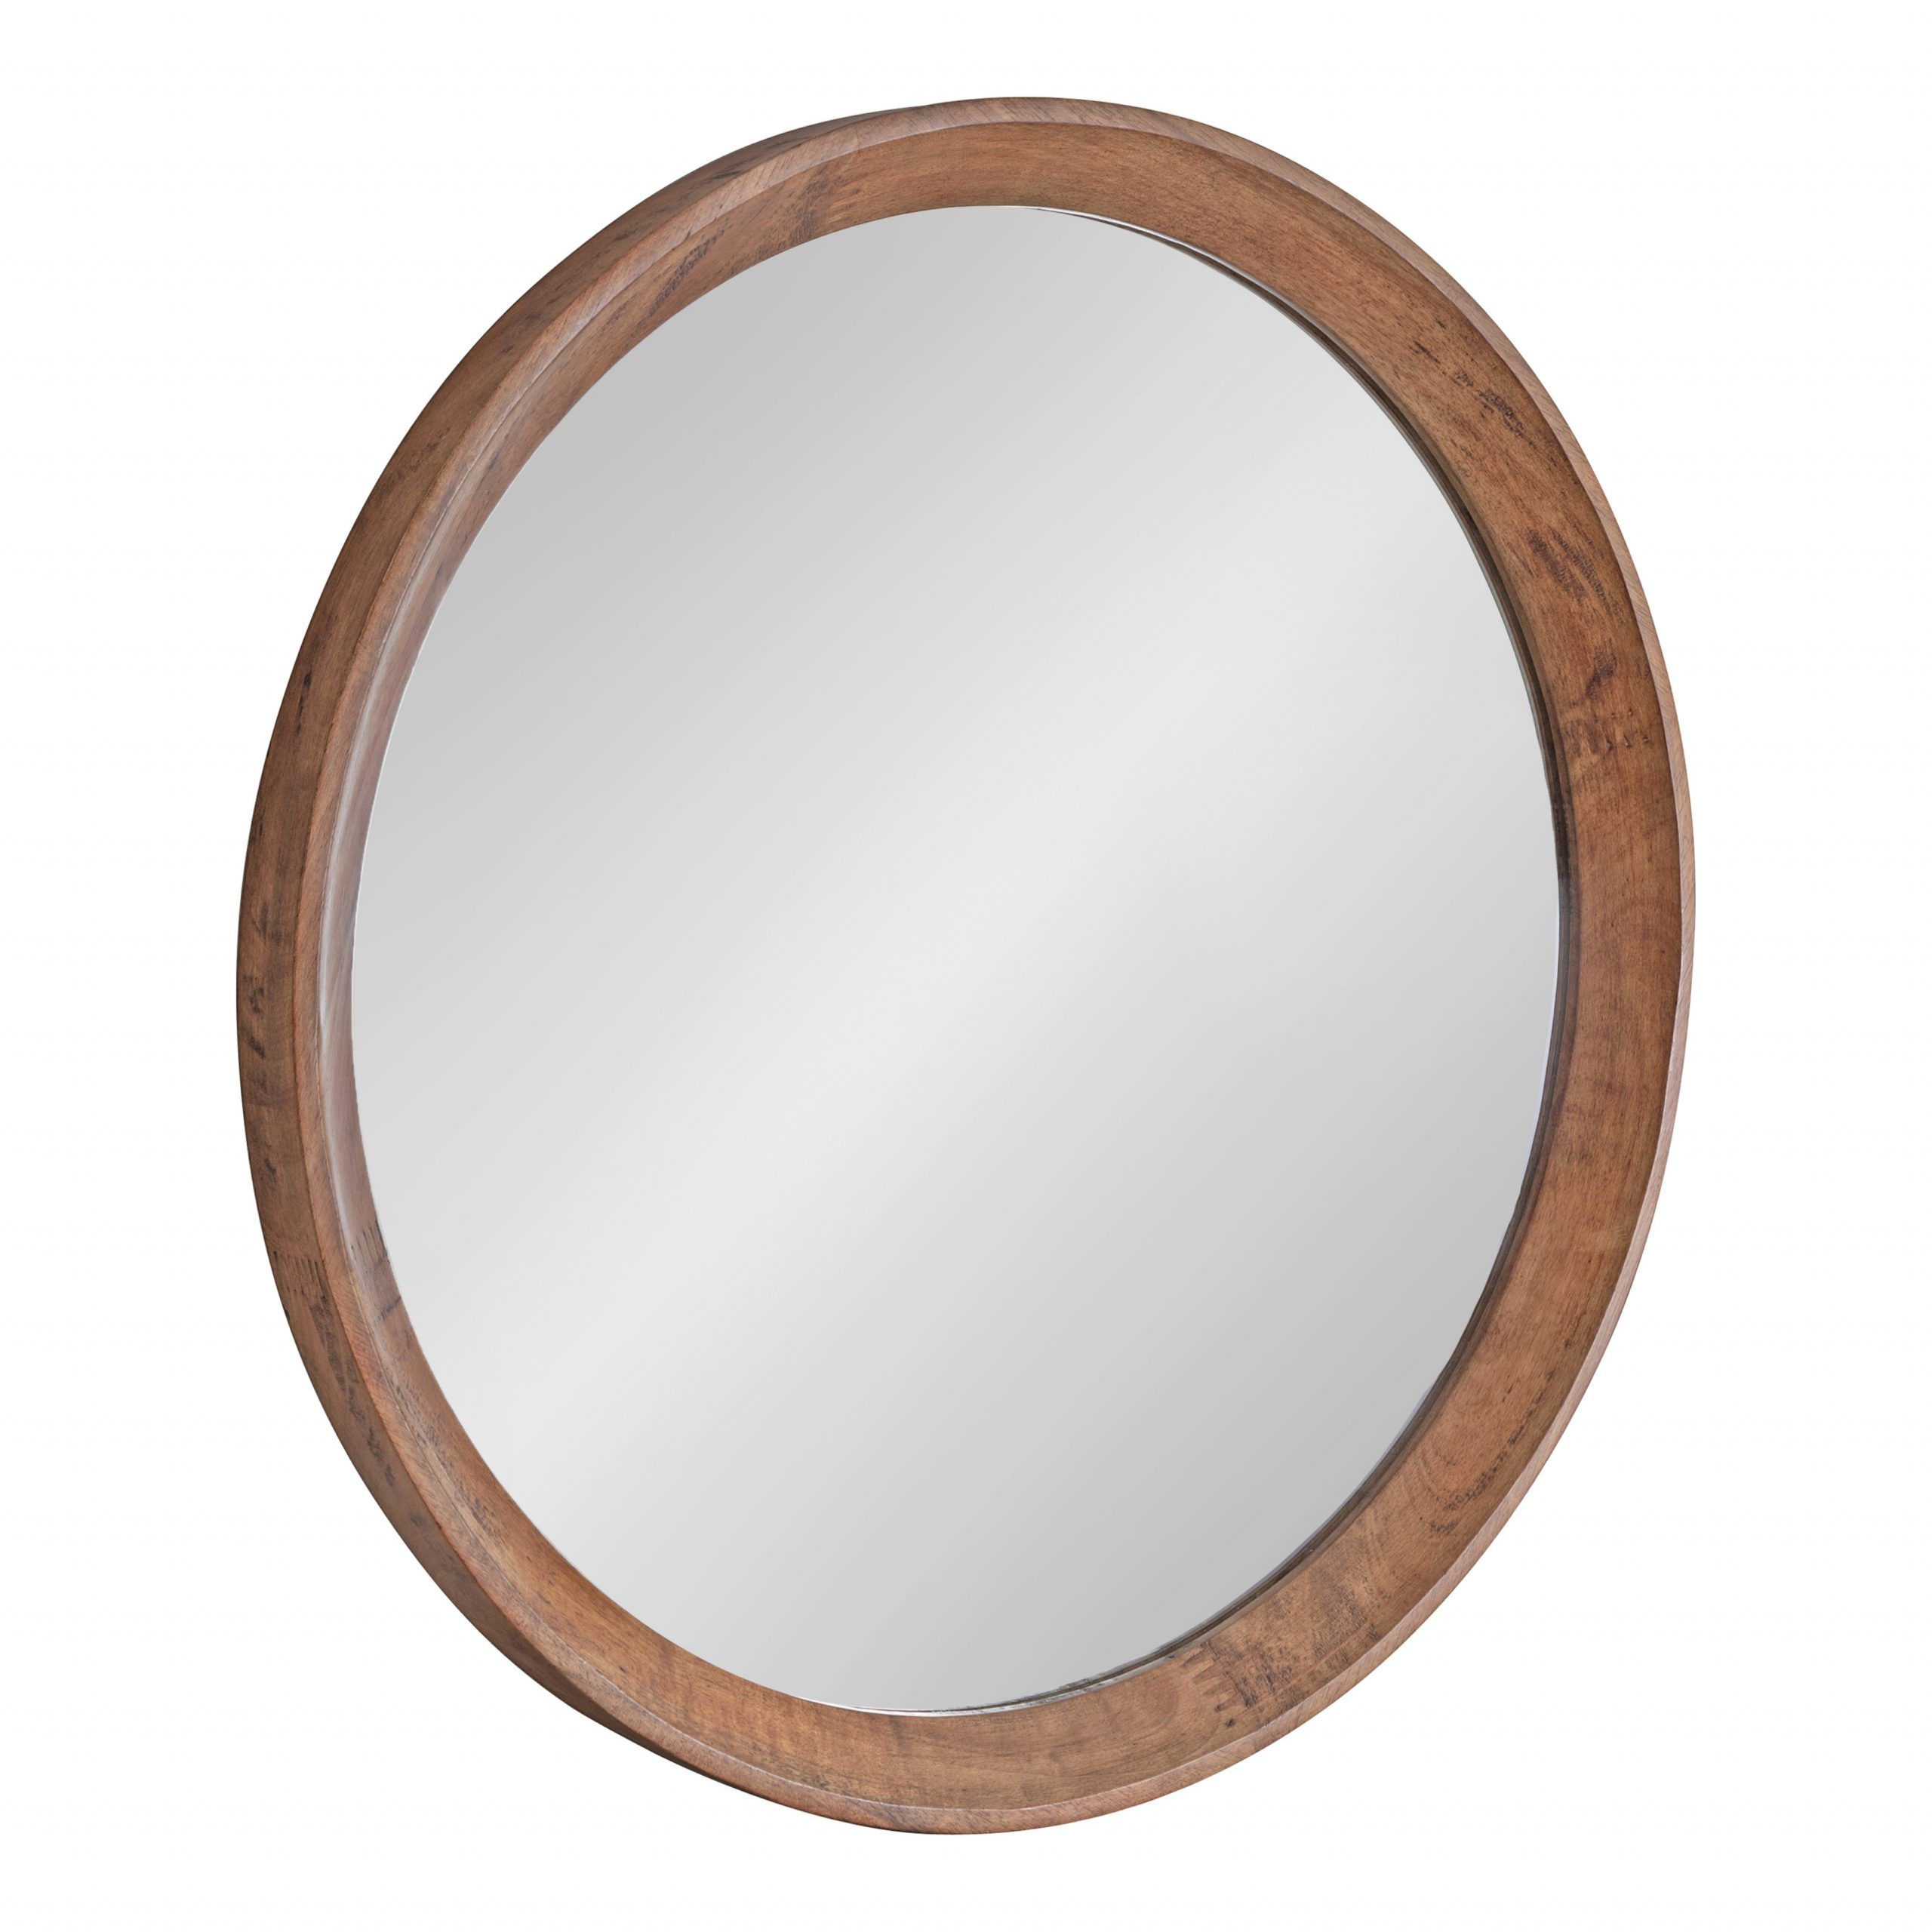 Kate And Laurel Hartman Transitional Round Wood Framed Wall Mirror, 30 Intended For Medium Brown Wood Wall Mirrors (View 3 of 15)